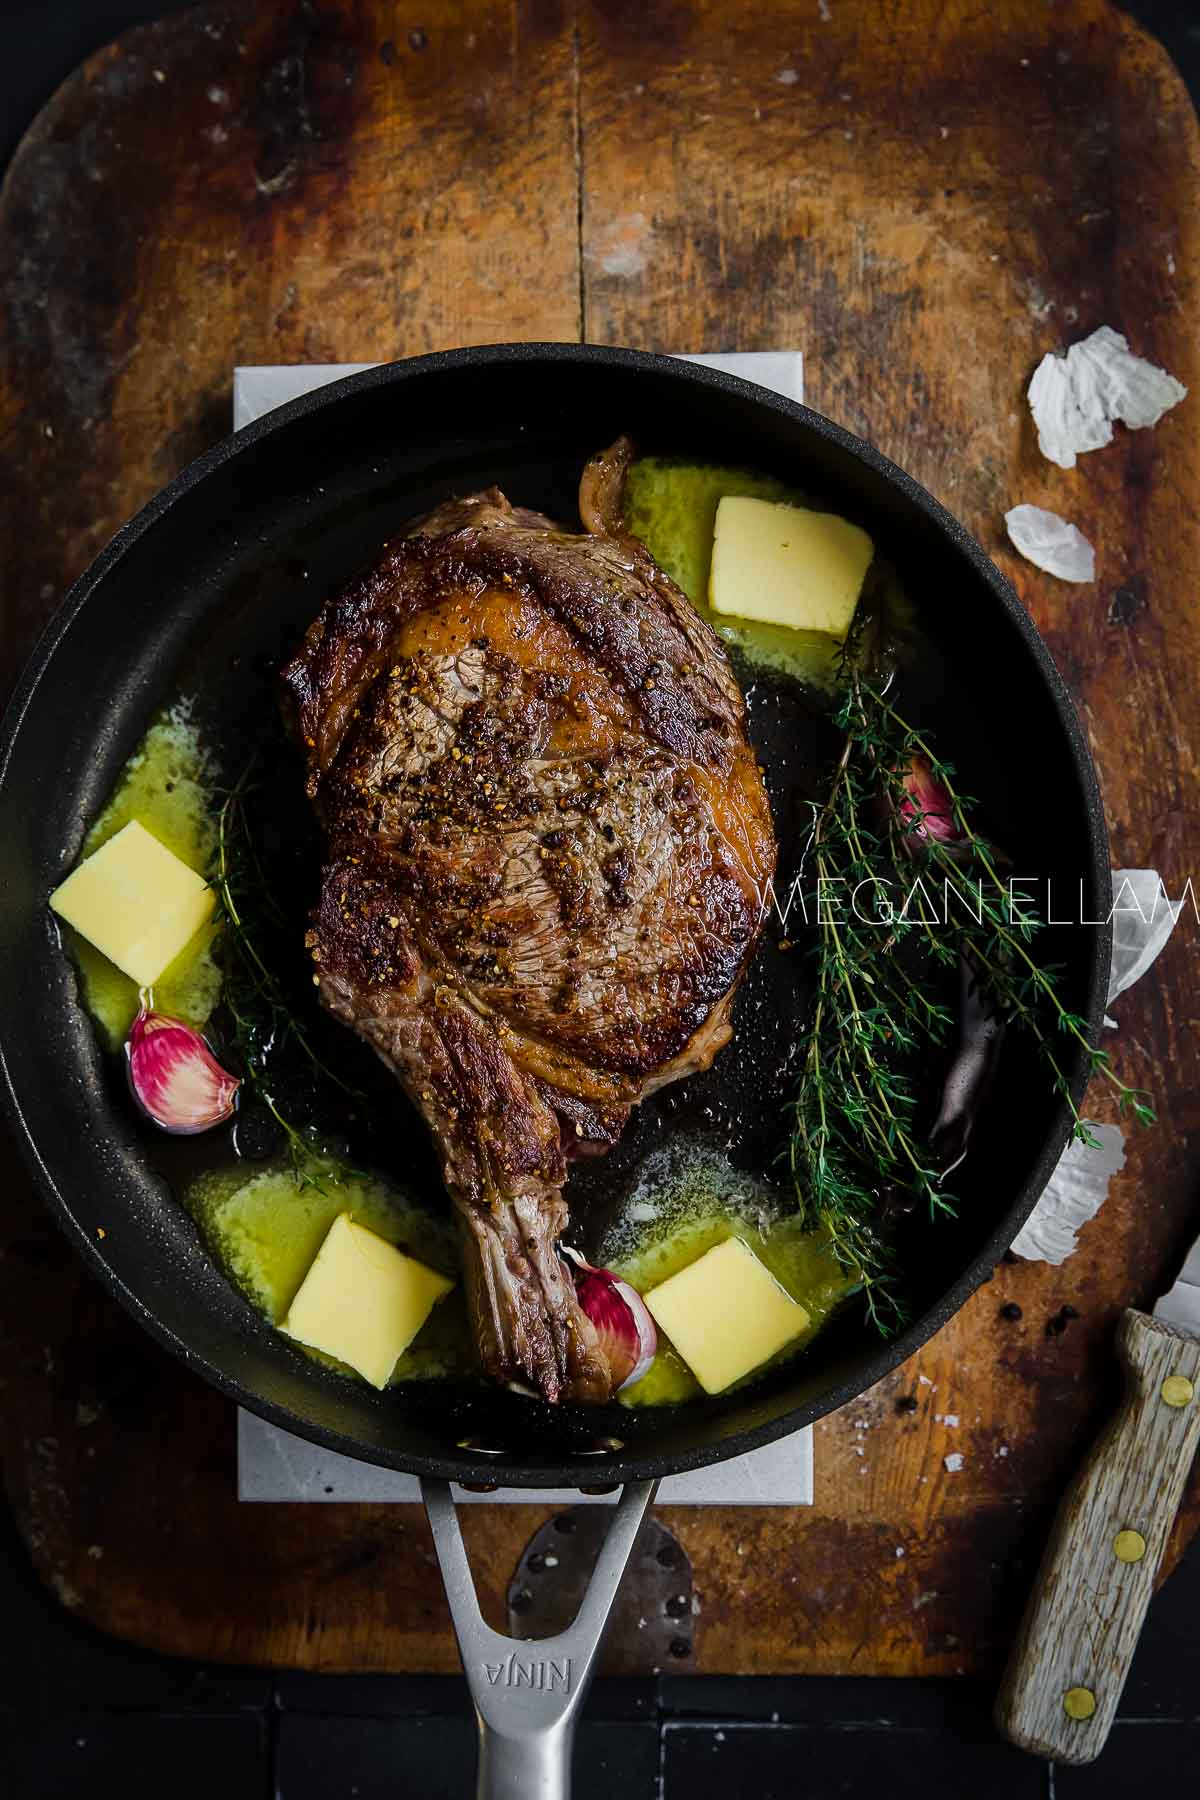 A cote beef rib in a cast iron pan with herbs, garlic and butter.